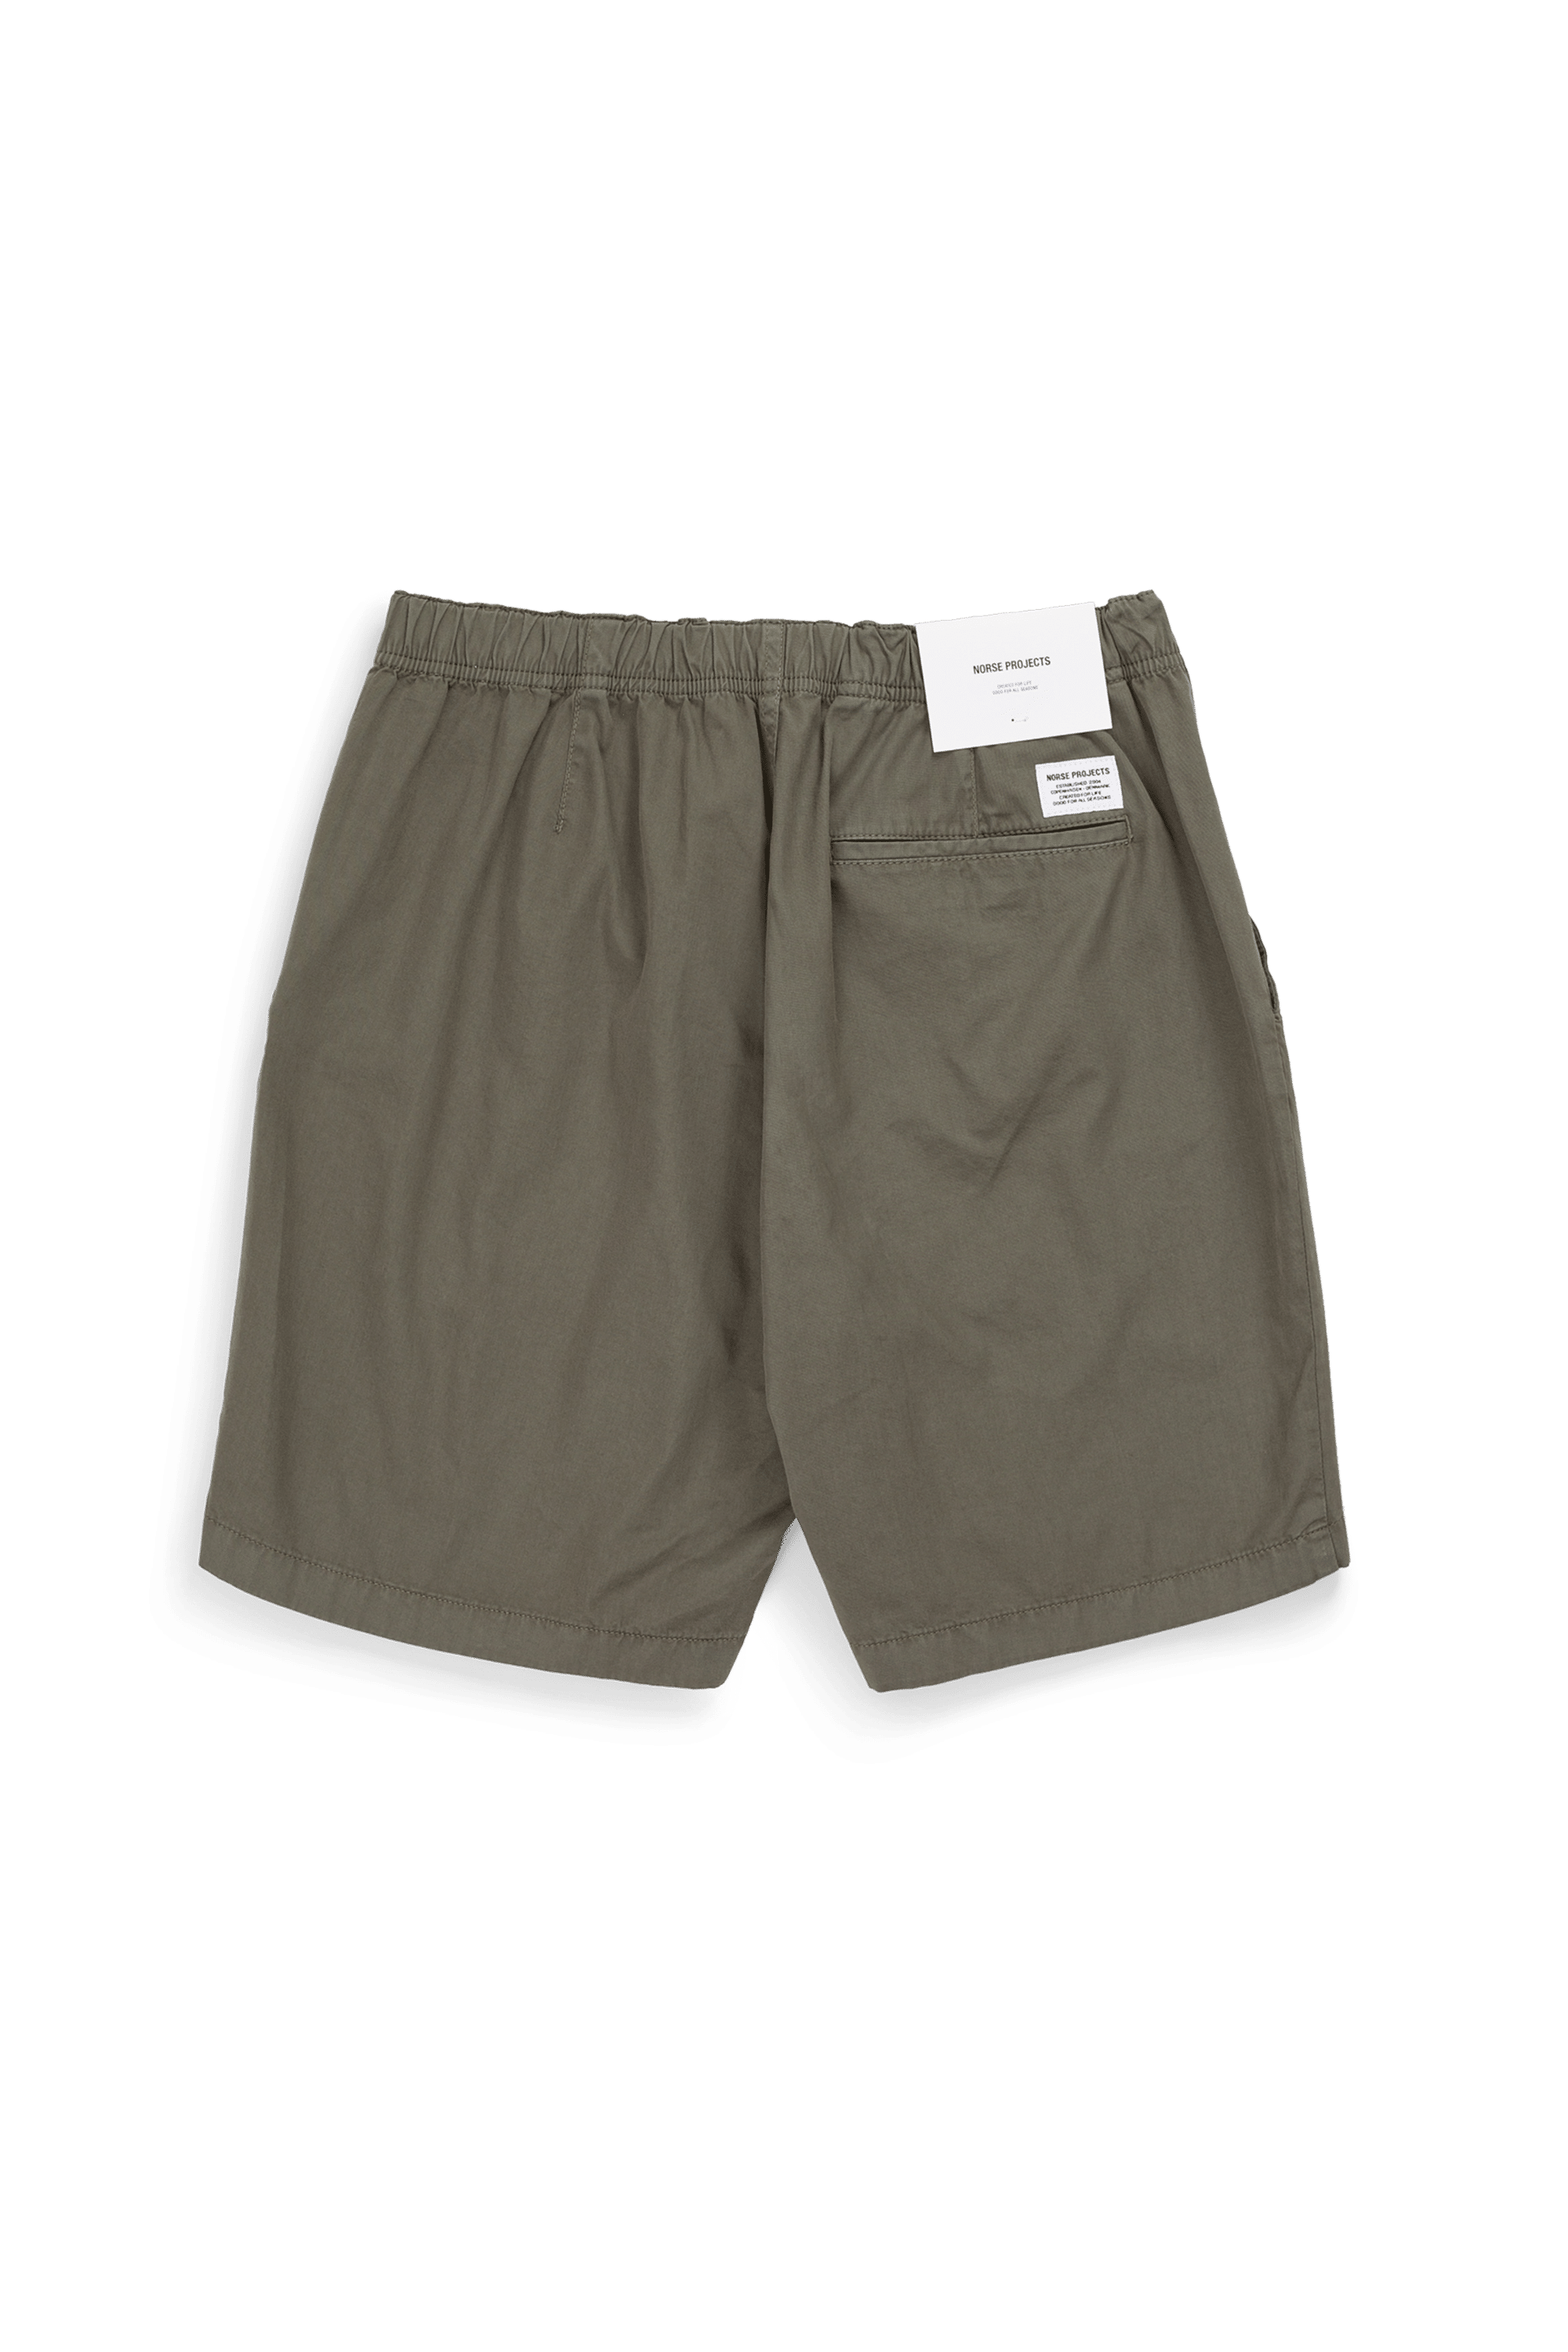 NORSE PROJECTS Ezra Light Twill Shorts - Dried Green Back